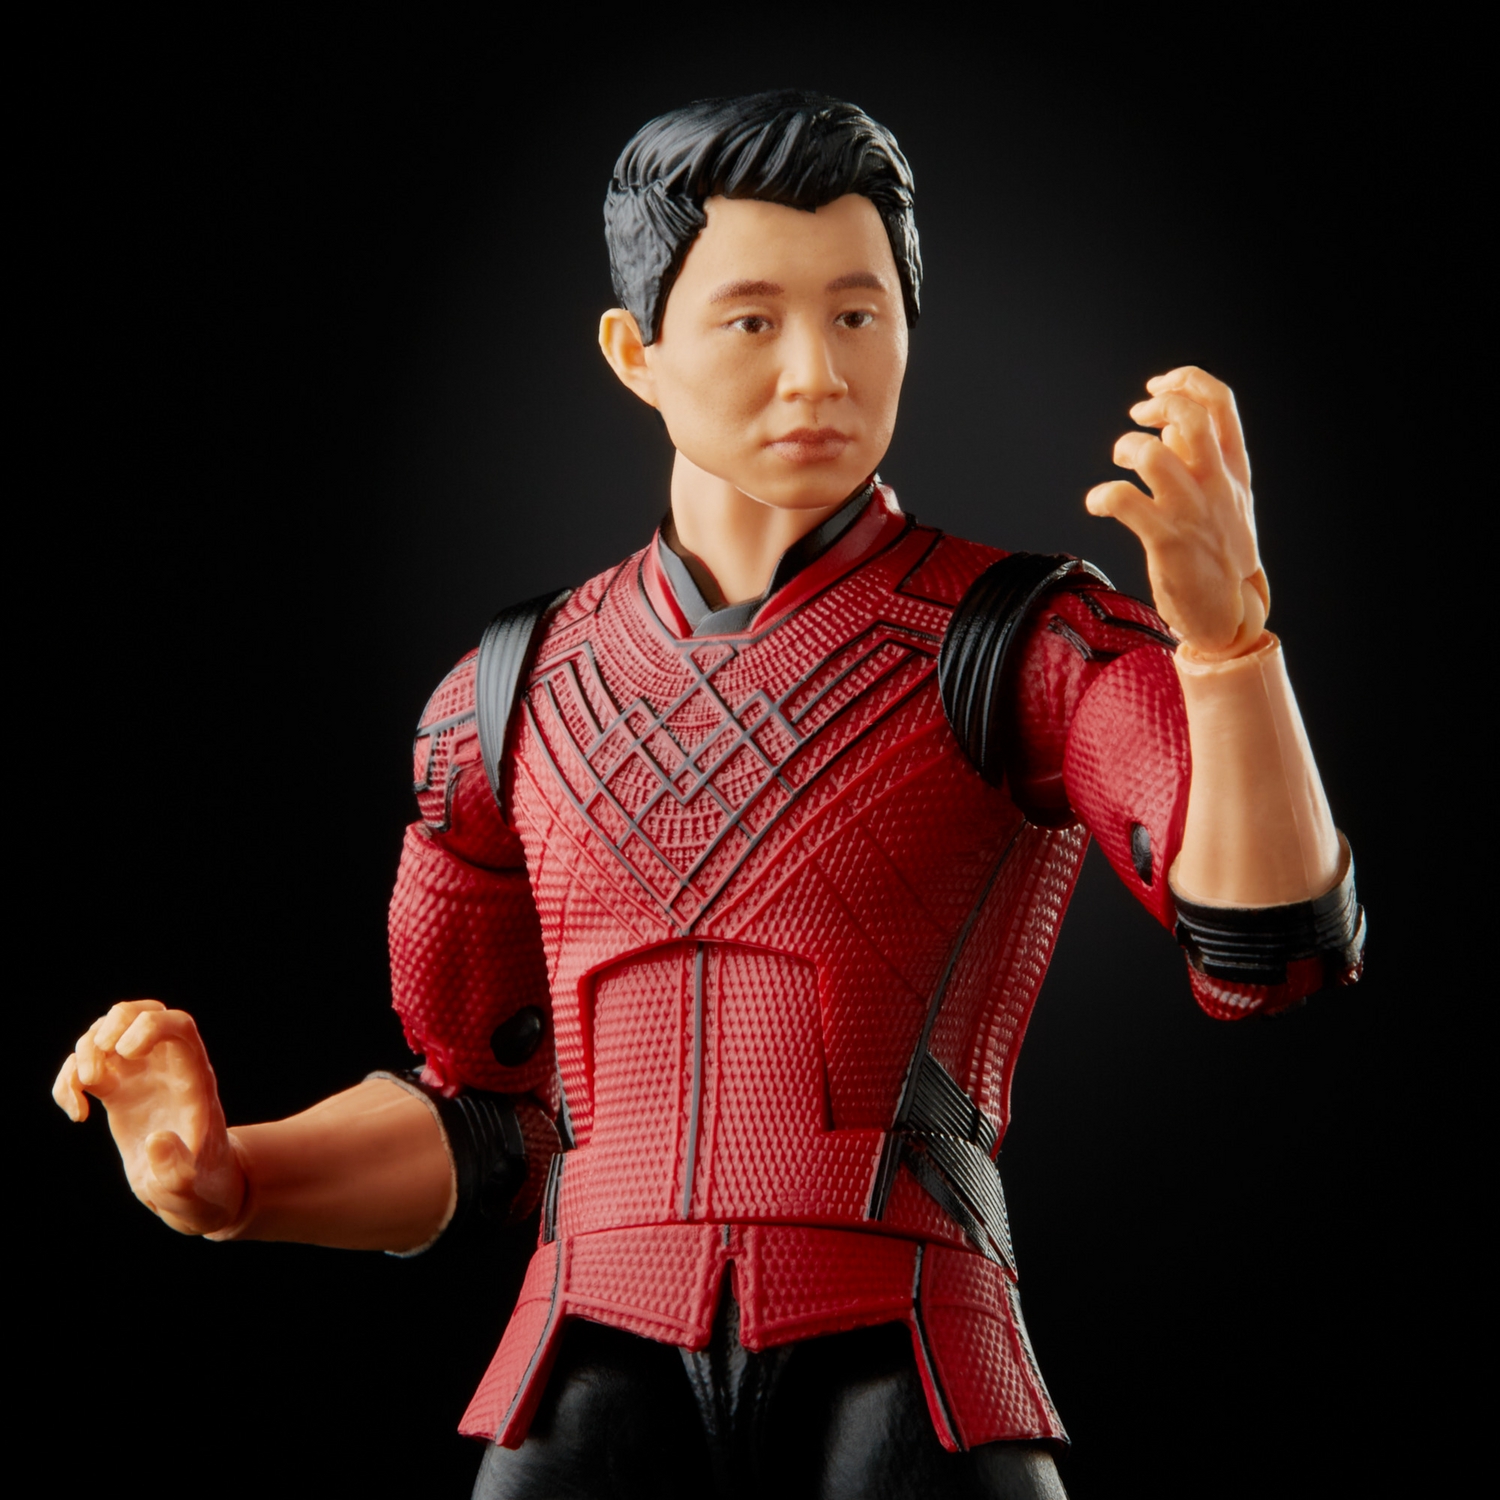 MARVEL LEGENDS SERIES 6-INCH SHANG-CHI AND THE LEGEND OF THE TEN RINGS - Shang-Chi oop4.jpg